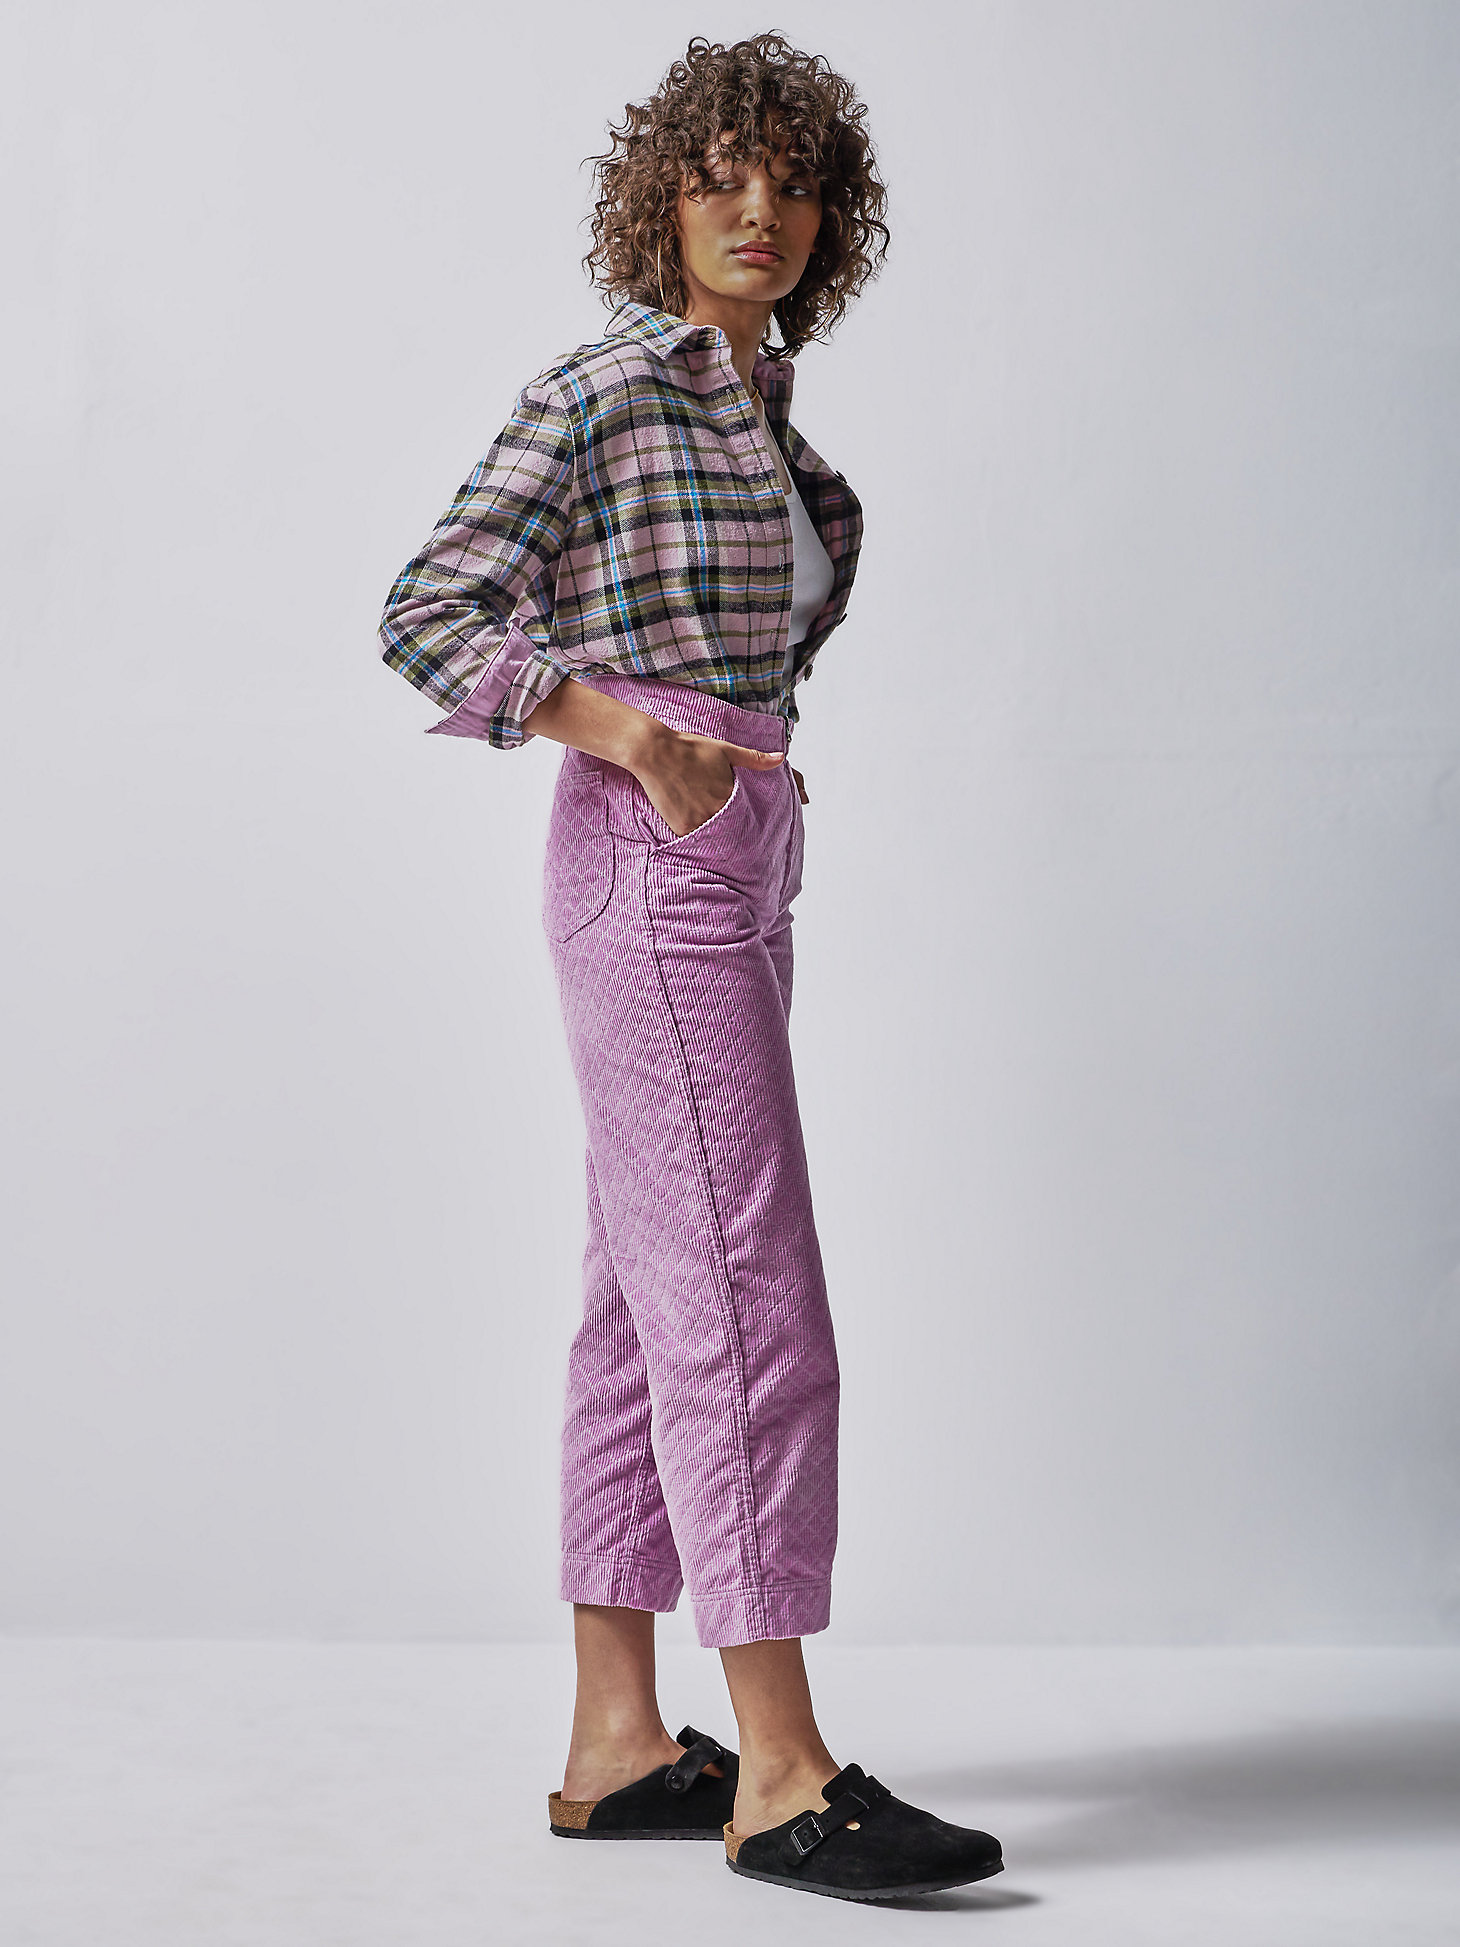 Women's Lee® x The Brooklyn Circus® Whizit Zip Corduroy Pant in Sugar Lilac alternative view 3